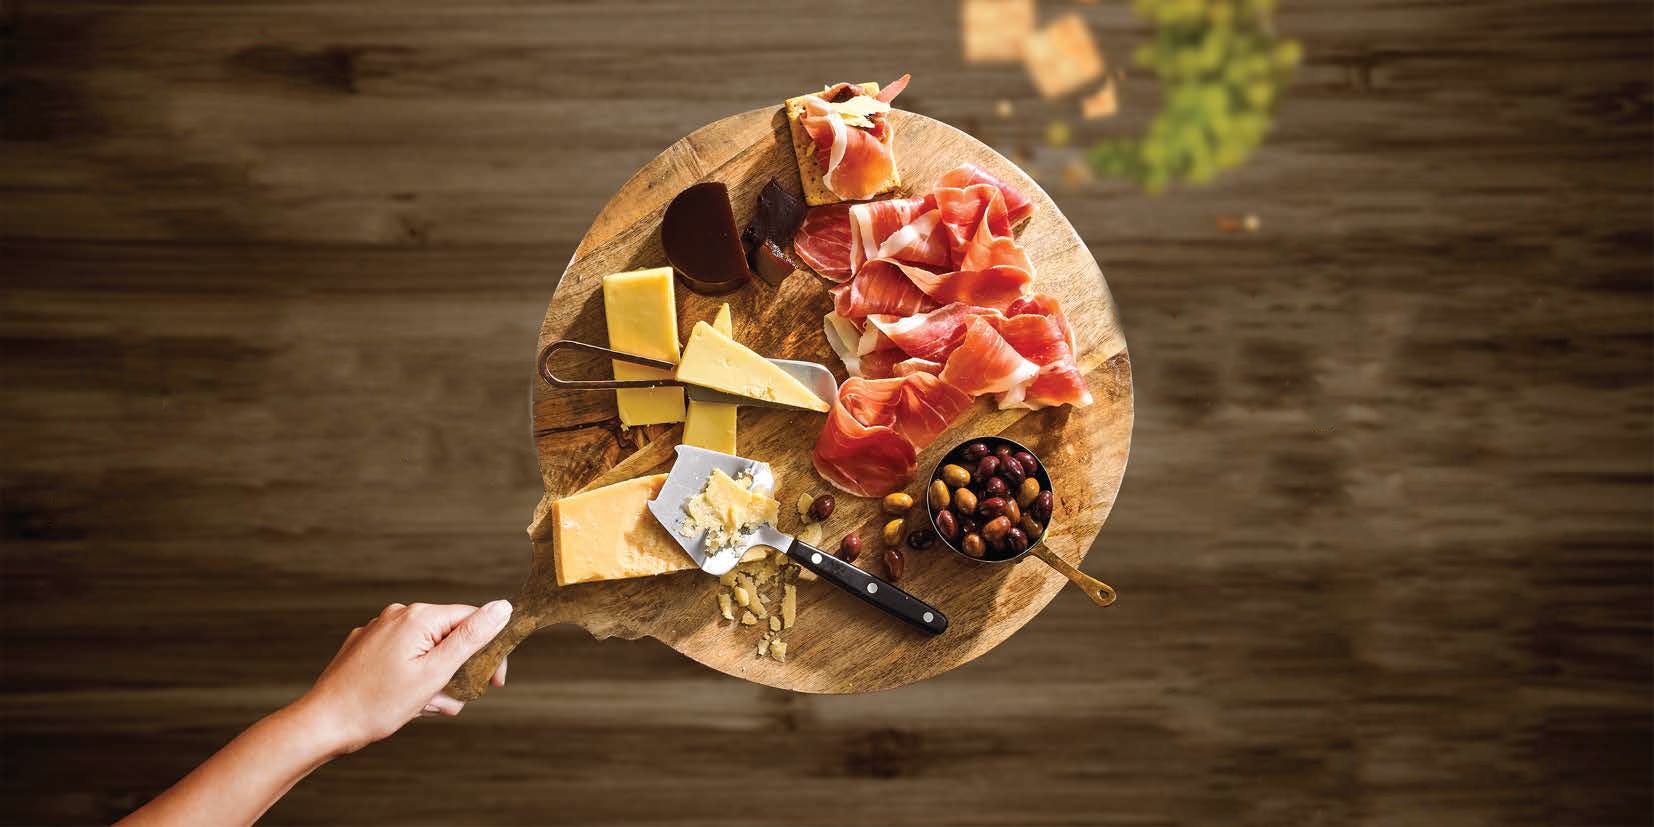 5 Steps to the Perfect Charcuterie Board